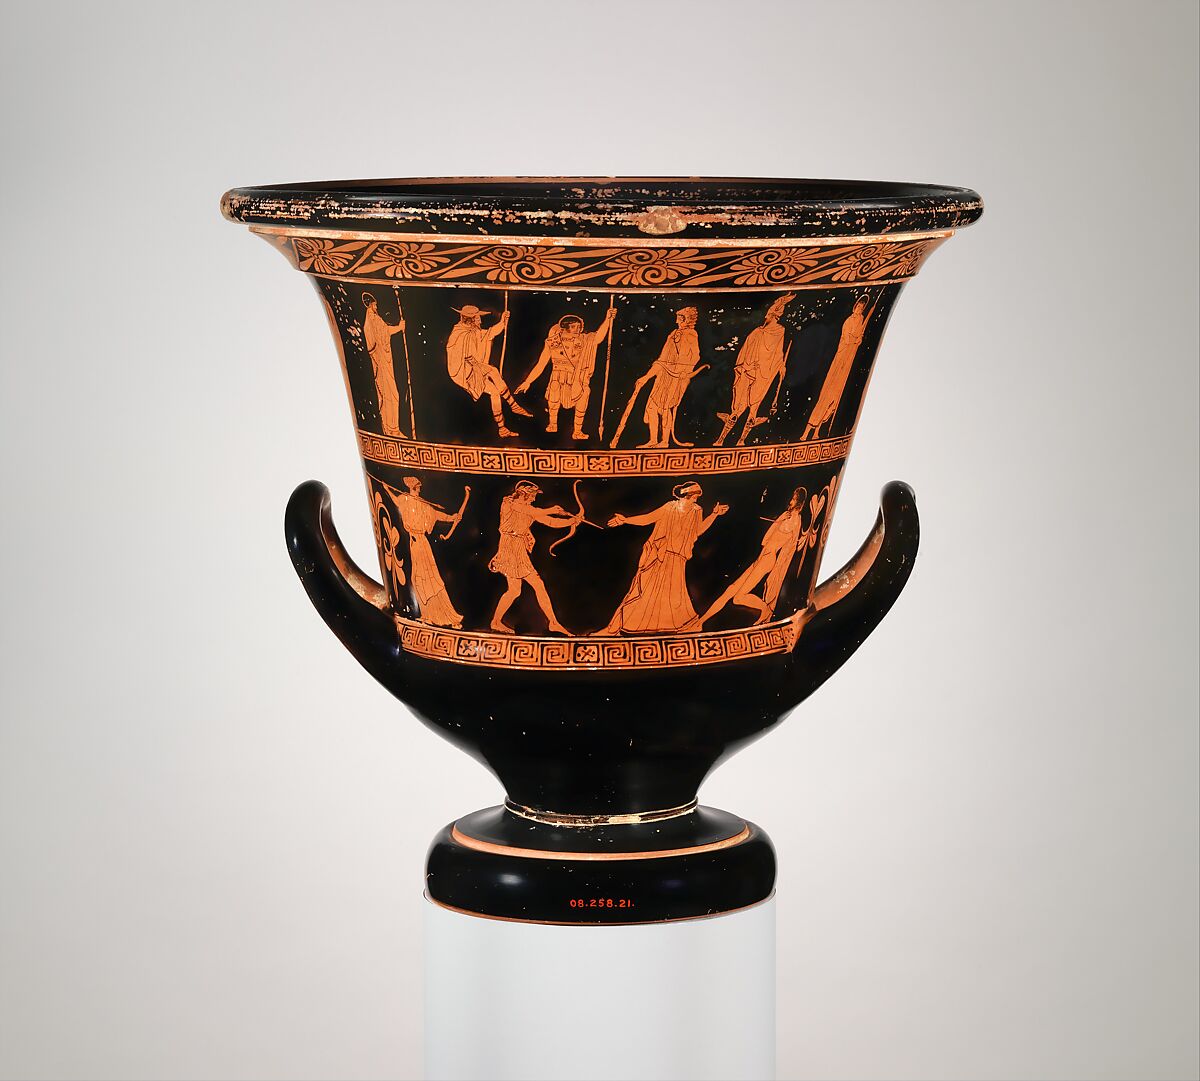 Terracotta calyx-krater (bowl for mixing wine and water), Attributed to the Nekyia Painter, Terracotta, Greek, Attic 